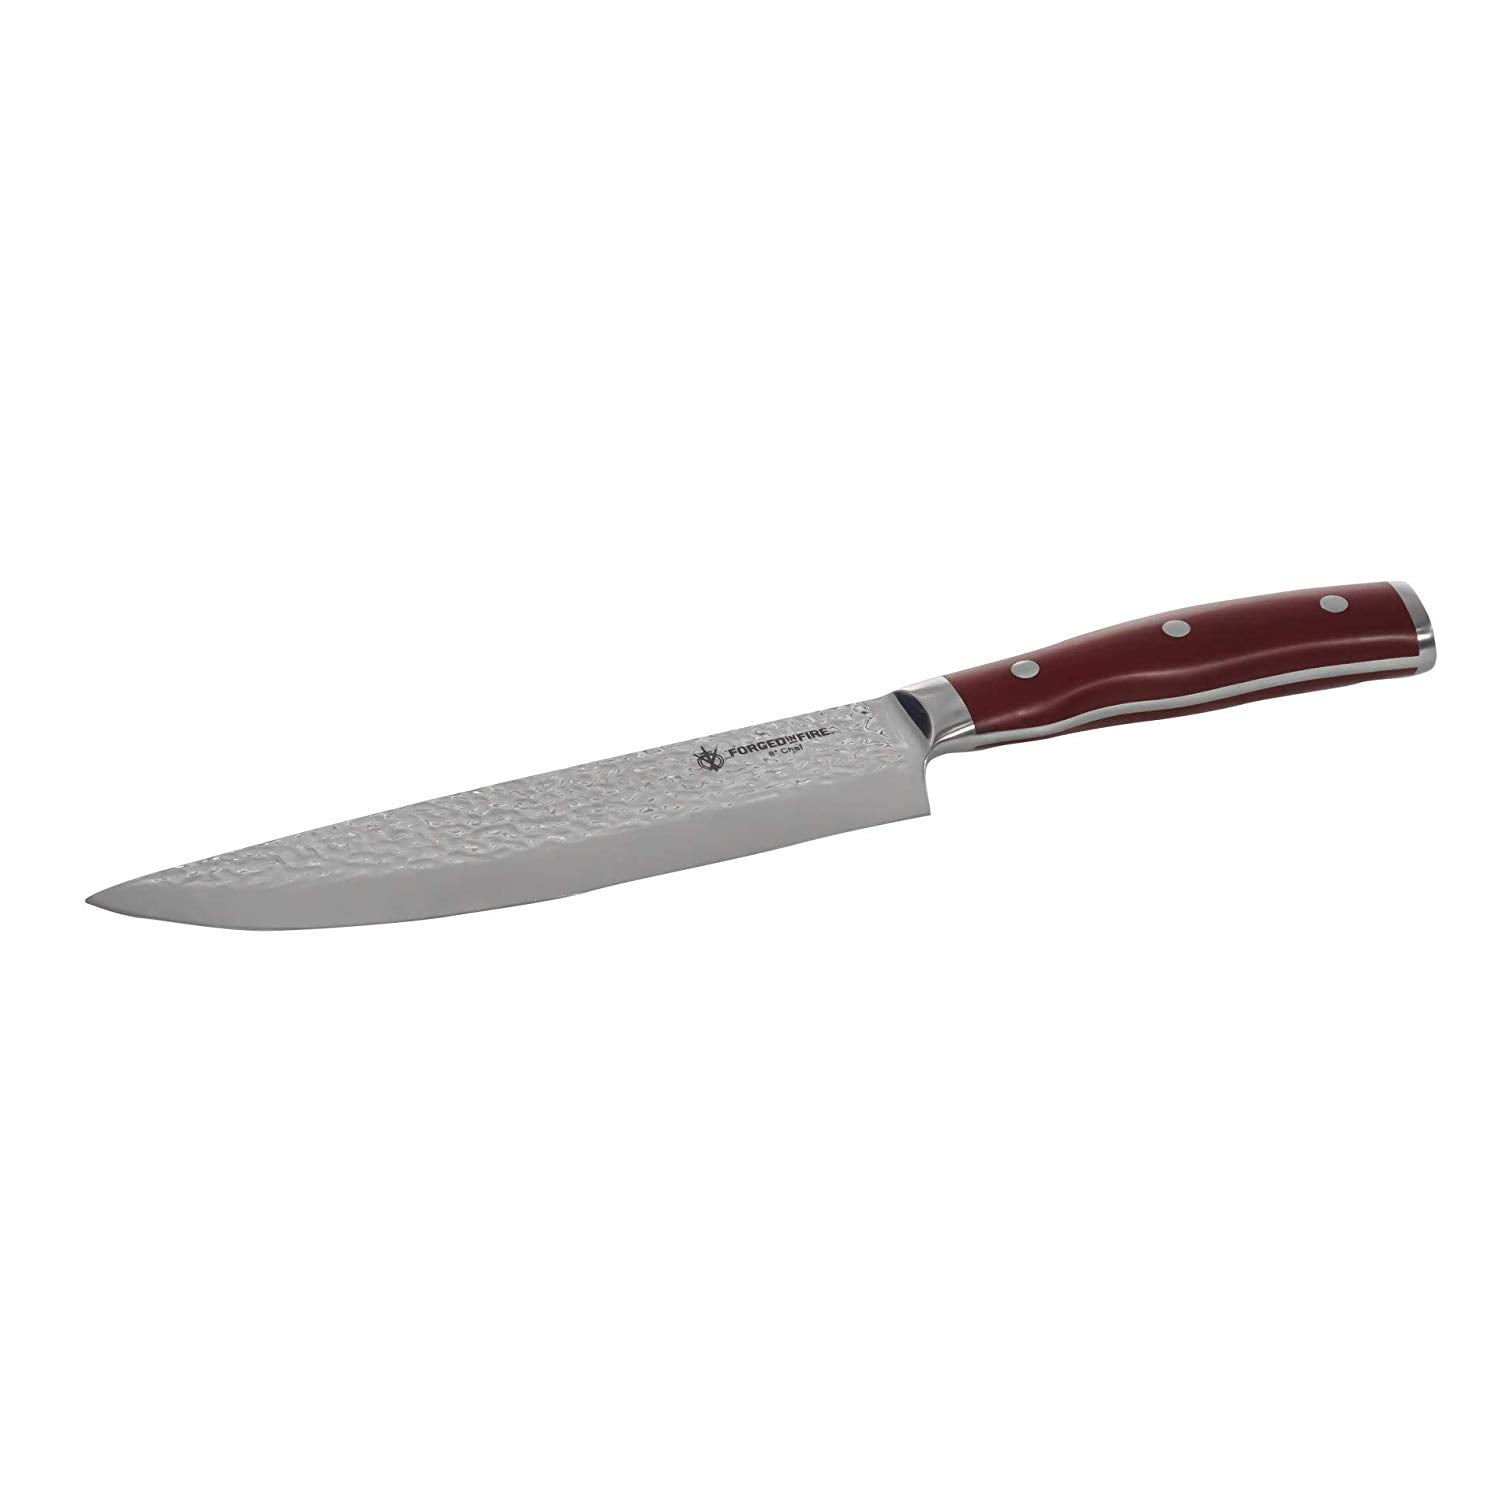 Forged in Fire 2 Piece Chef Knife Set, As Seen on TV